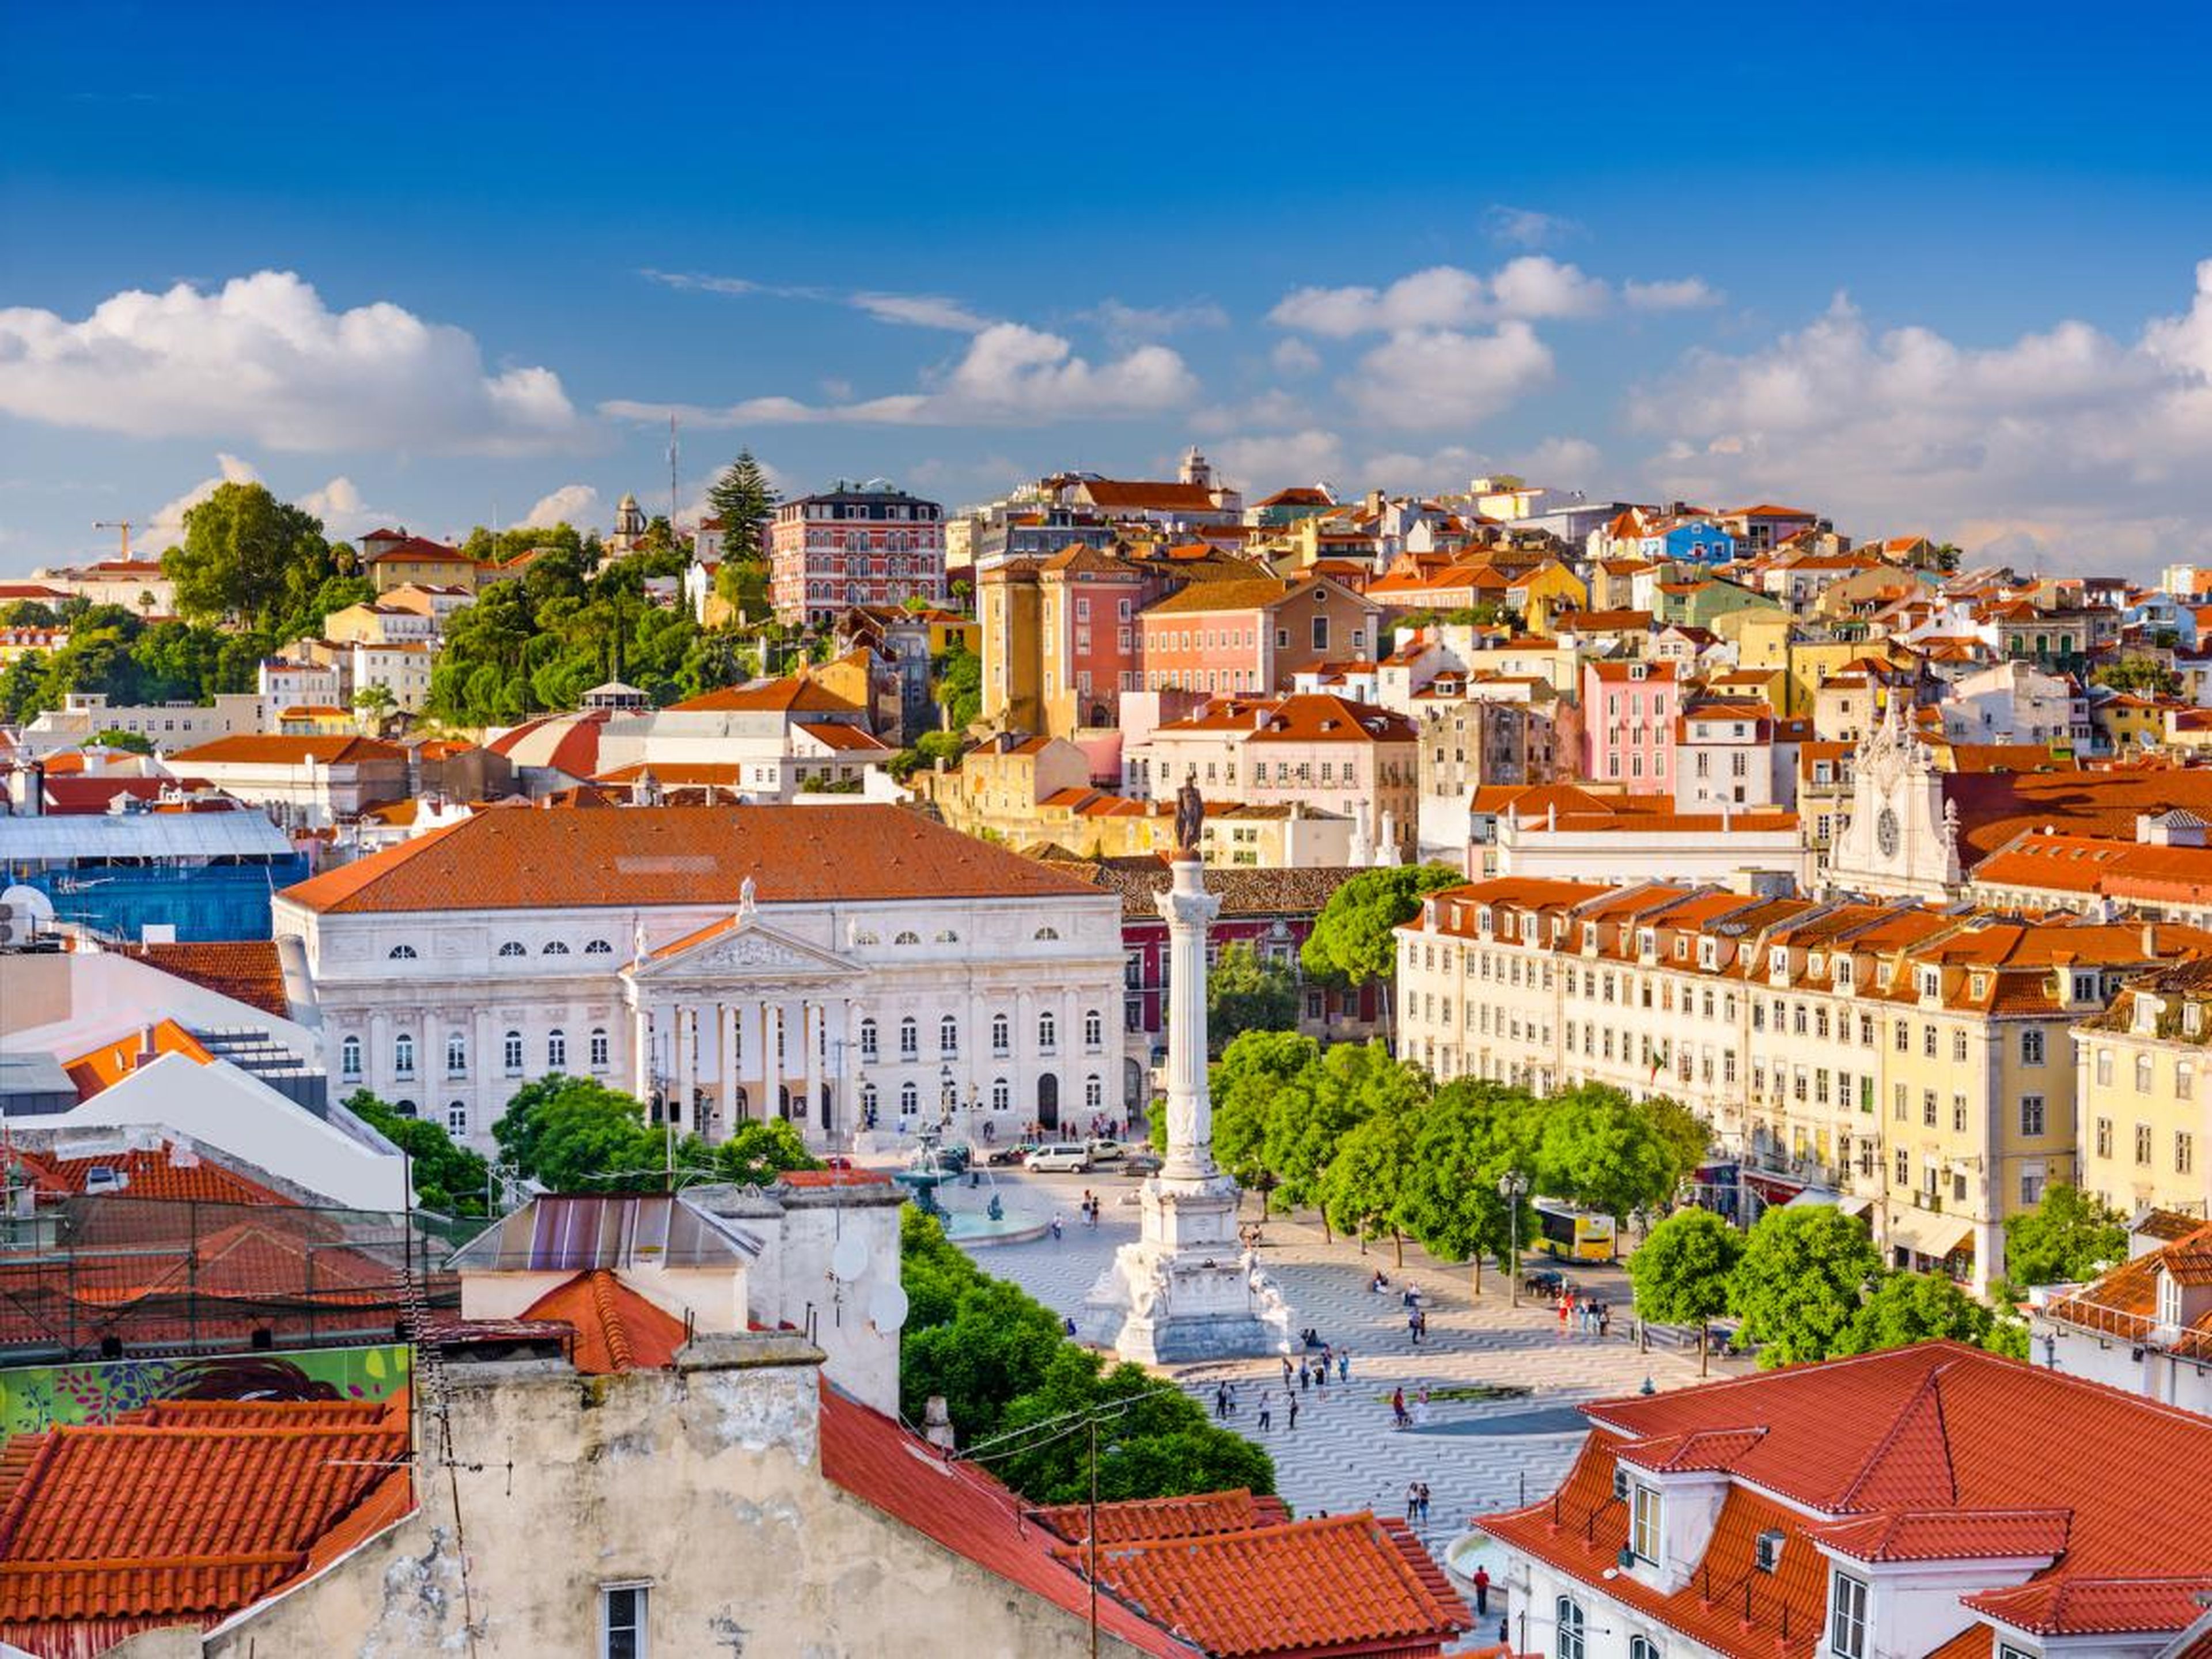 Lisbon, Portugal, has an emerging startup scene thanks to accelerator funding and plenty of coworking spaces.